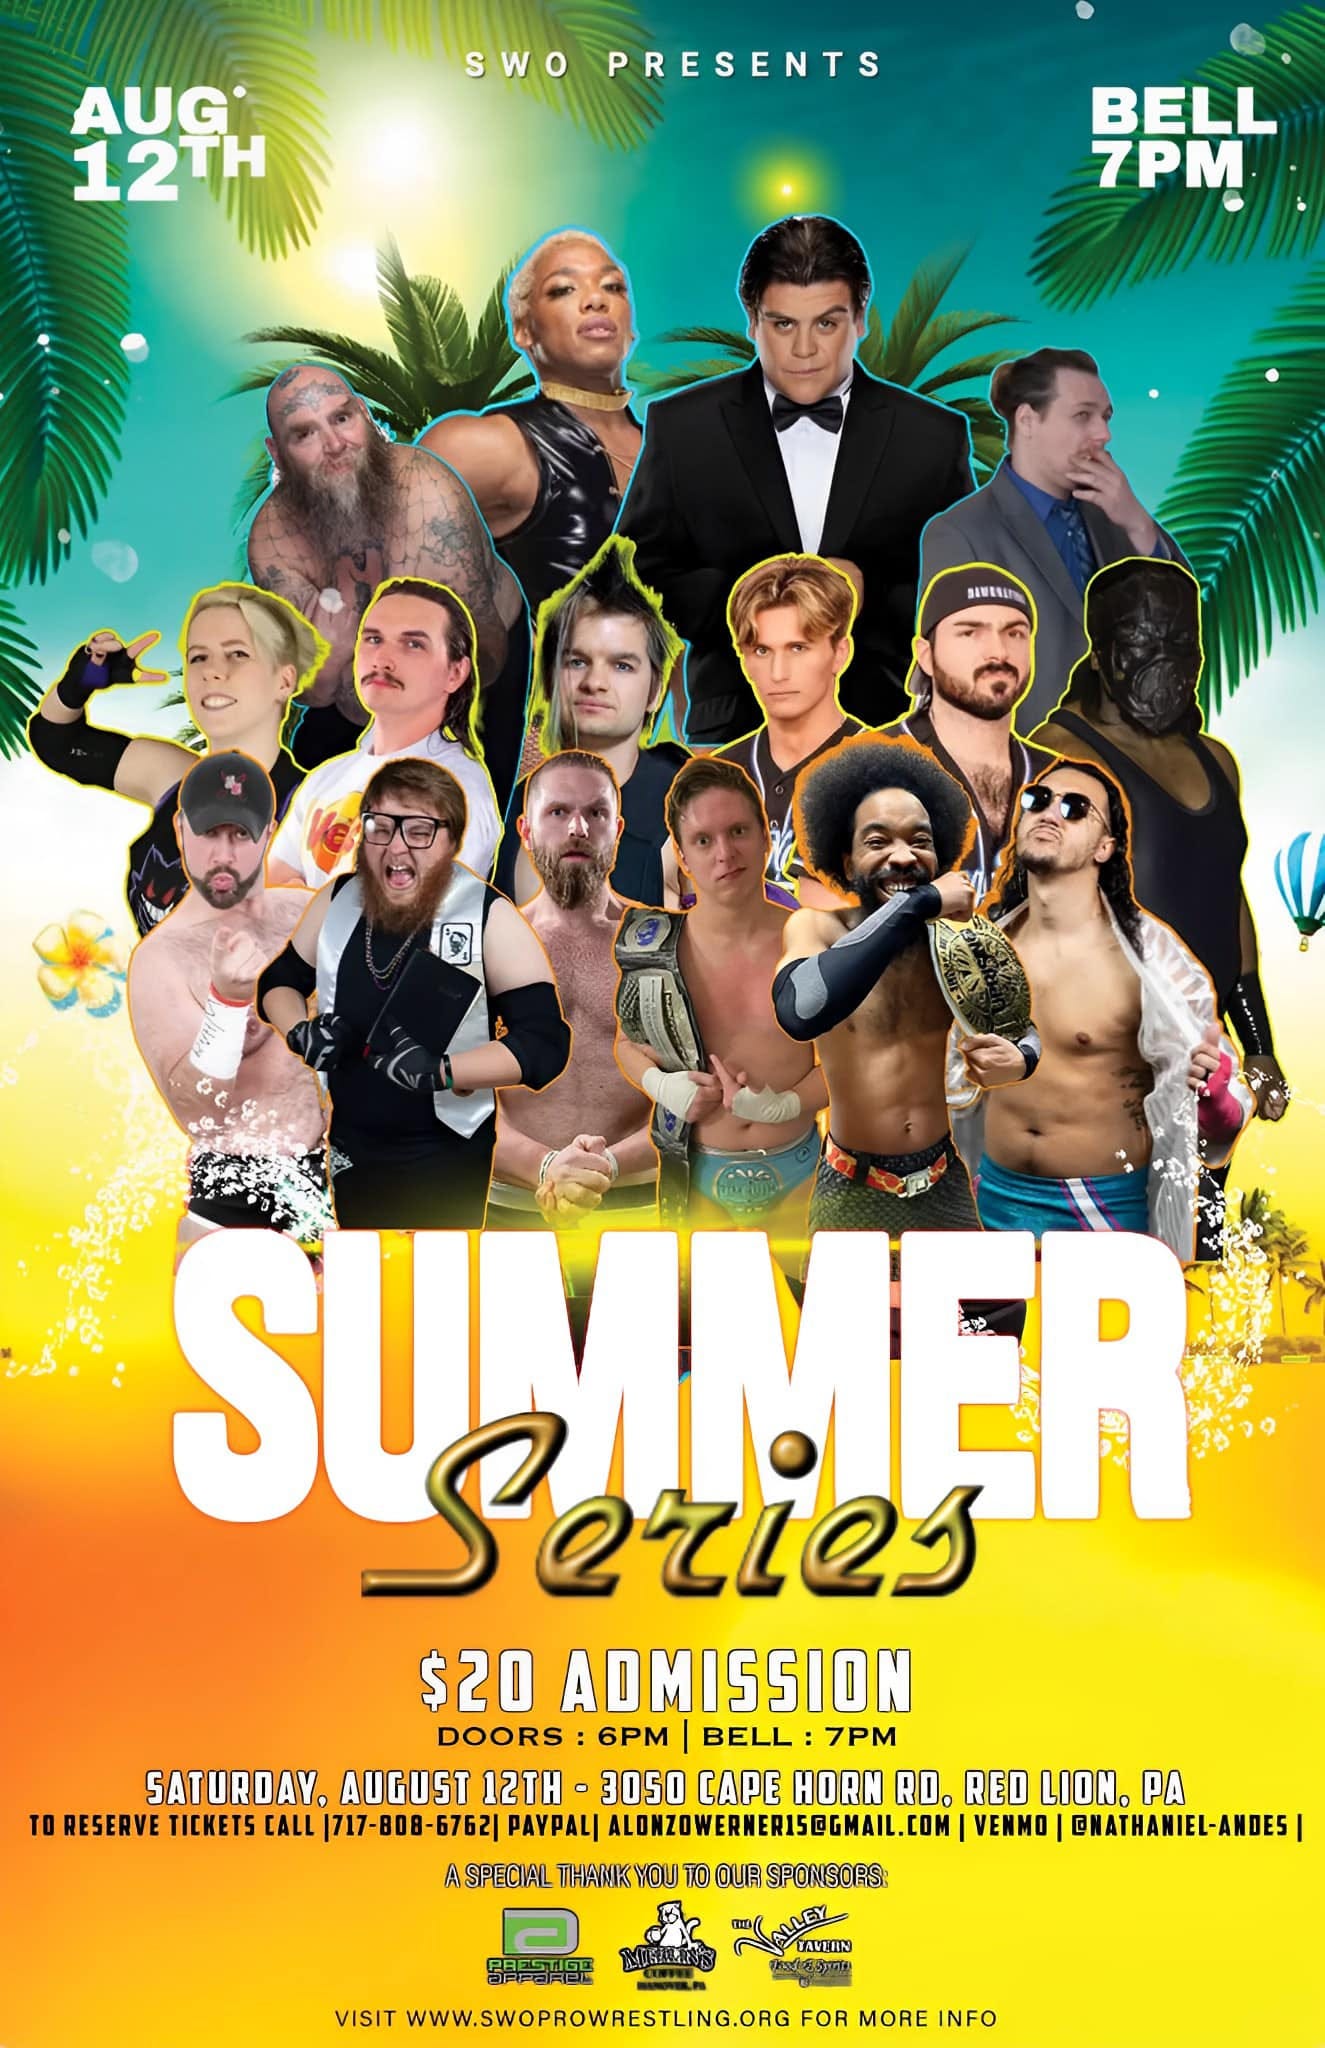 May be an image of 7 people and text that says 'AUG 12TH SWO PRESENTS BELL 7PM SUMMER Series $20 A ADMISSION DOORS 6PM BELL: 7PM SATURDAY, AUGUST 12TH 3050 CAPE HORN RO. RED LION. PA τO RESERVE TICKETS CALL |717-808- 6762 PAYPAL LONZO VENMO @NATHANIEL-ANDES ASPECIAL THANK YOUT VISIT WWW.SWOPROWRESTLING.ORG MORE INFO'